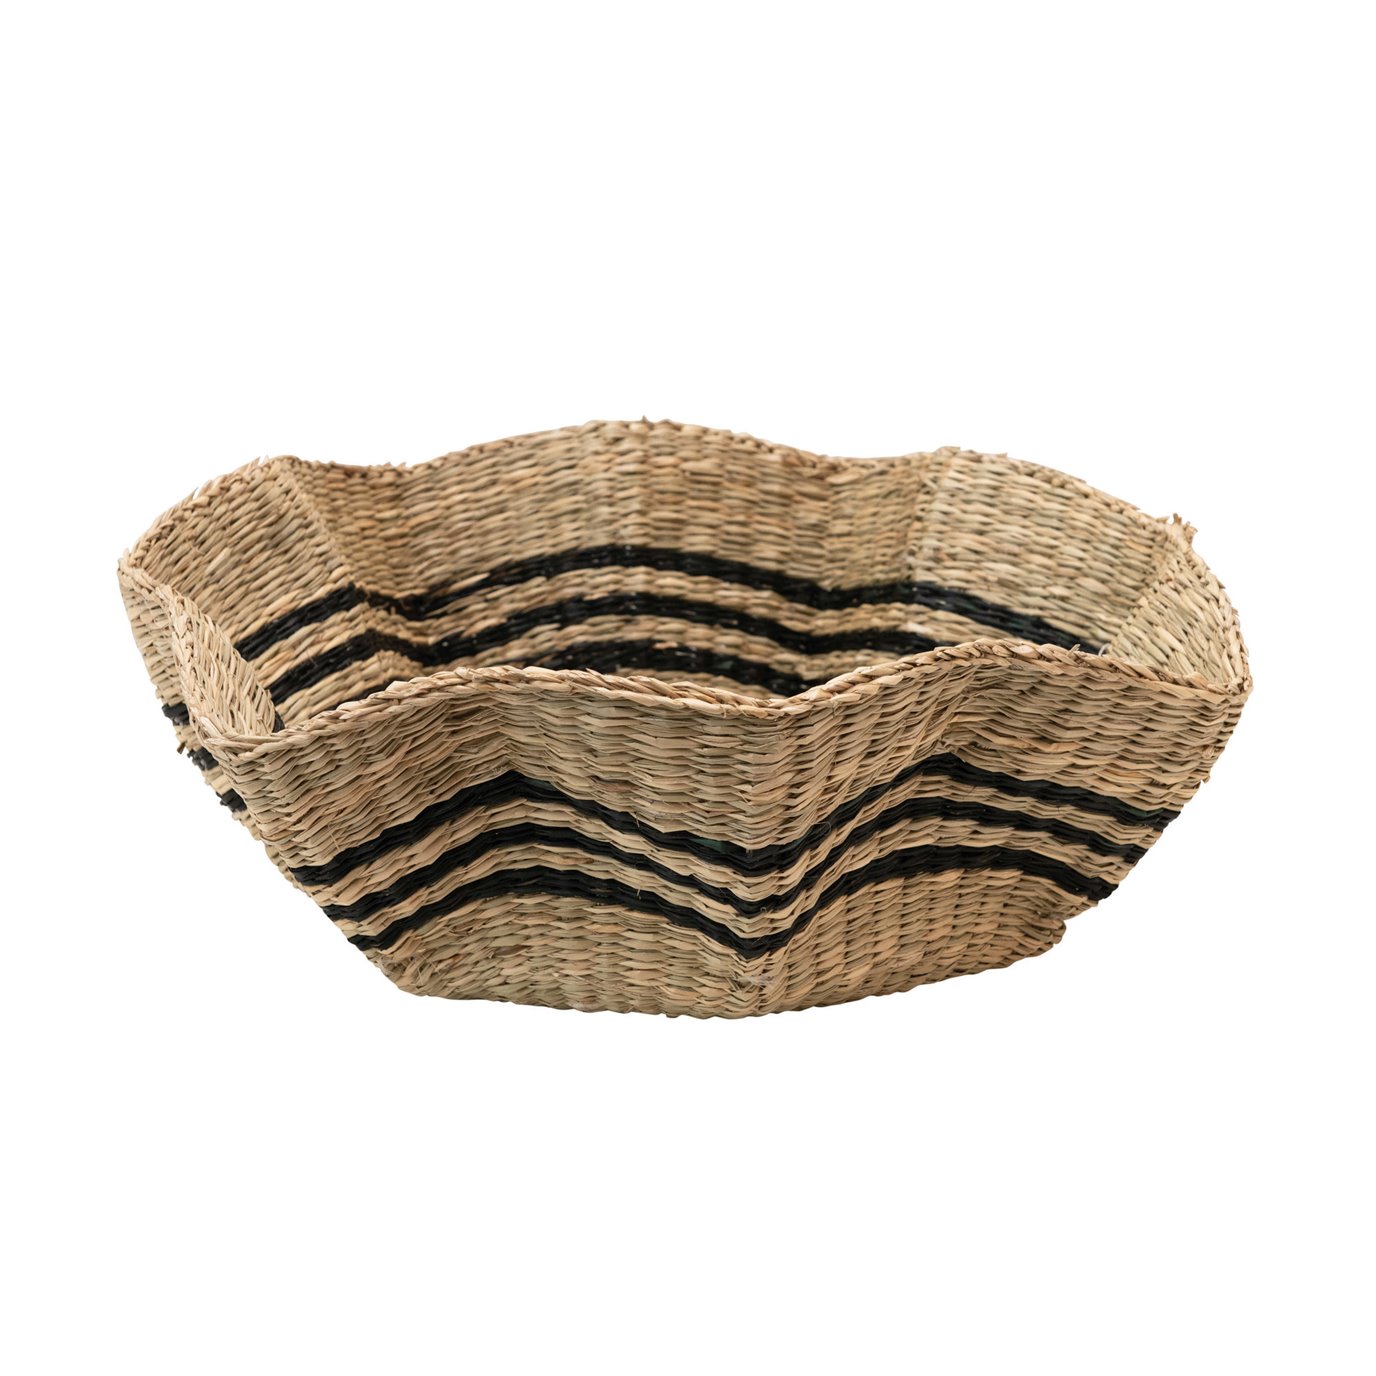 Hand-Woven Scalloped Seagrass Basket with Black Stripes